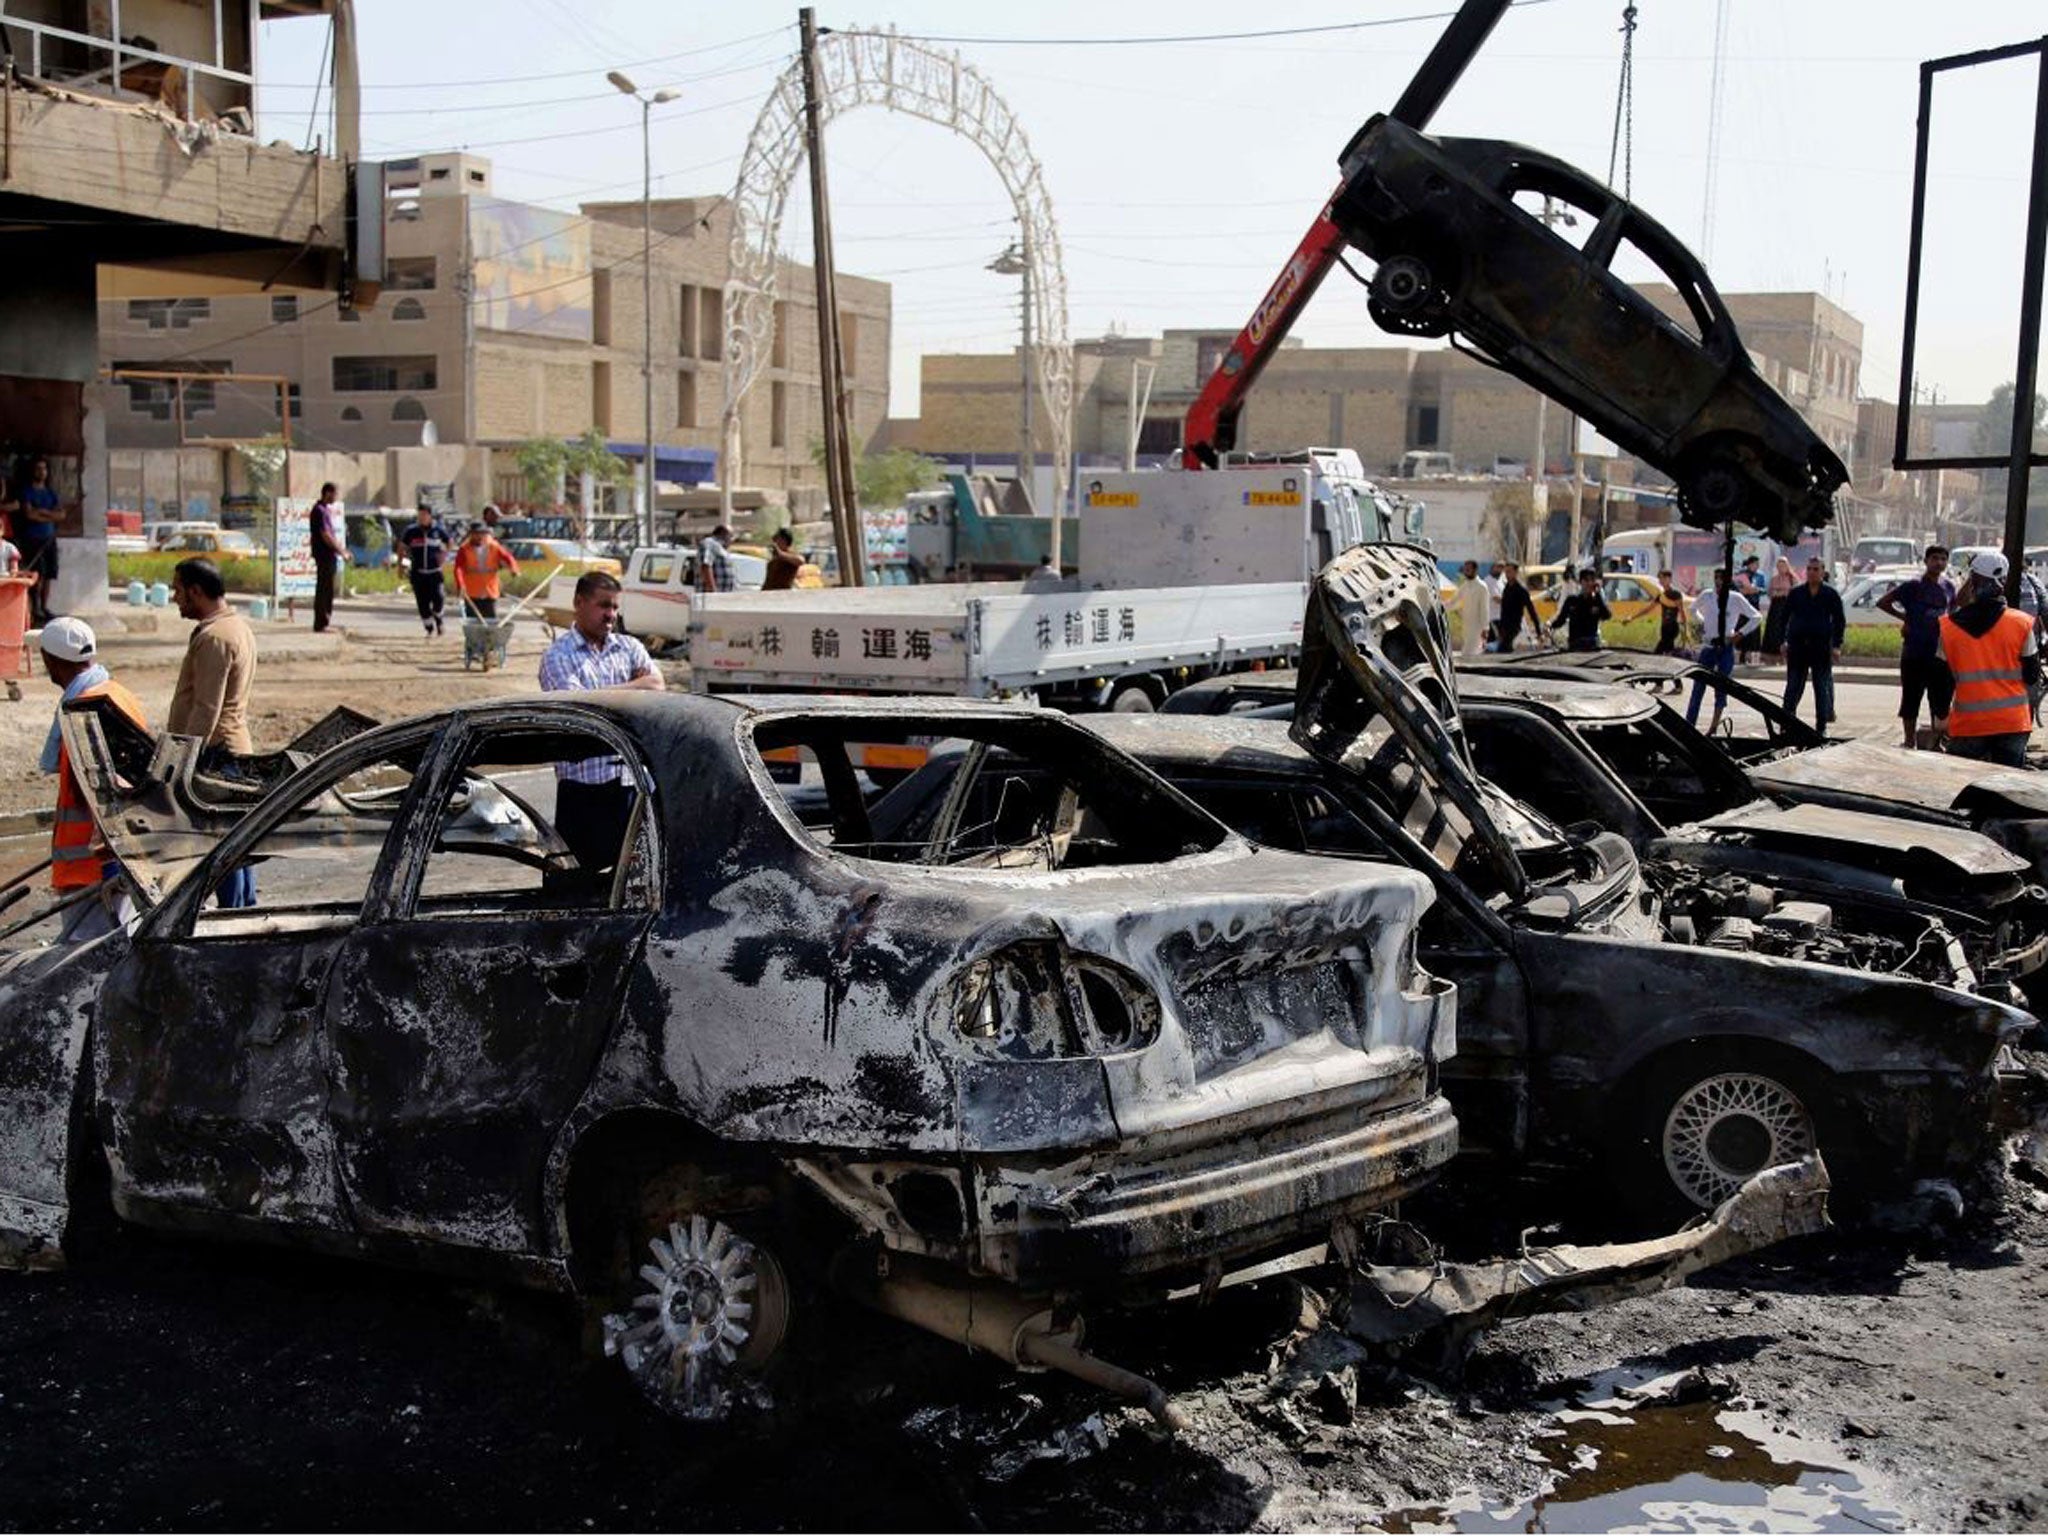 A crane lifts away a burned car at the site of a car bombing in the Sha'ab neighborhood of Baghdad on Sunday 27 October, 2013